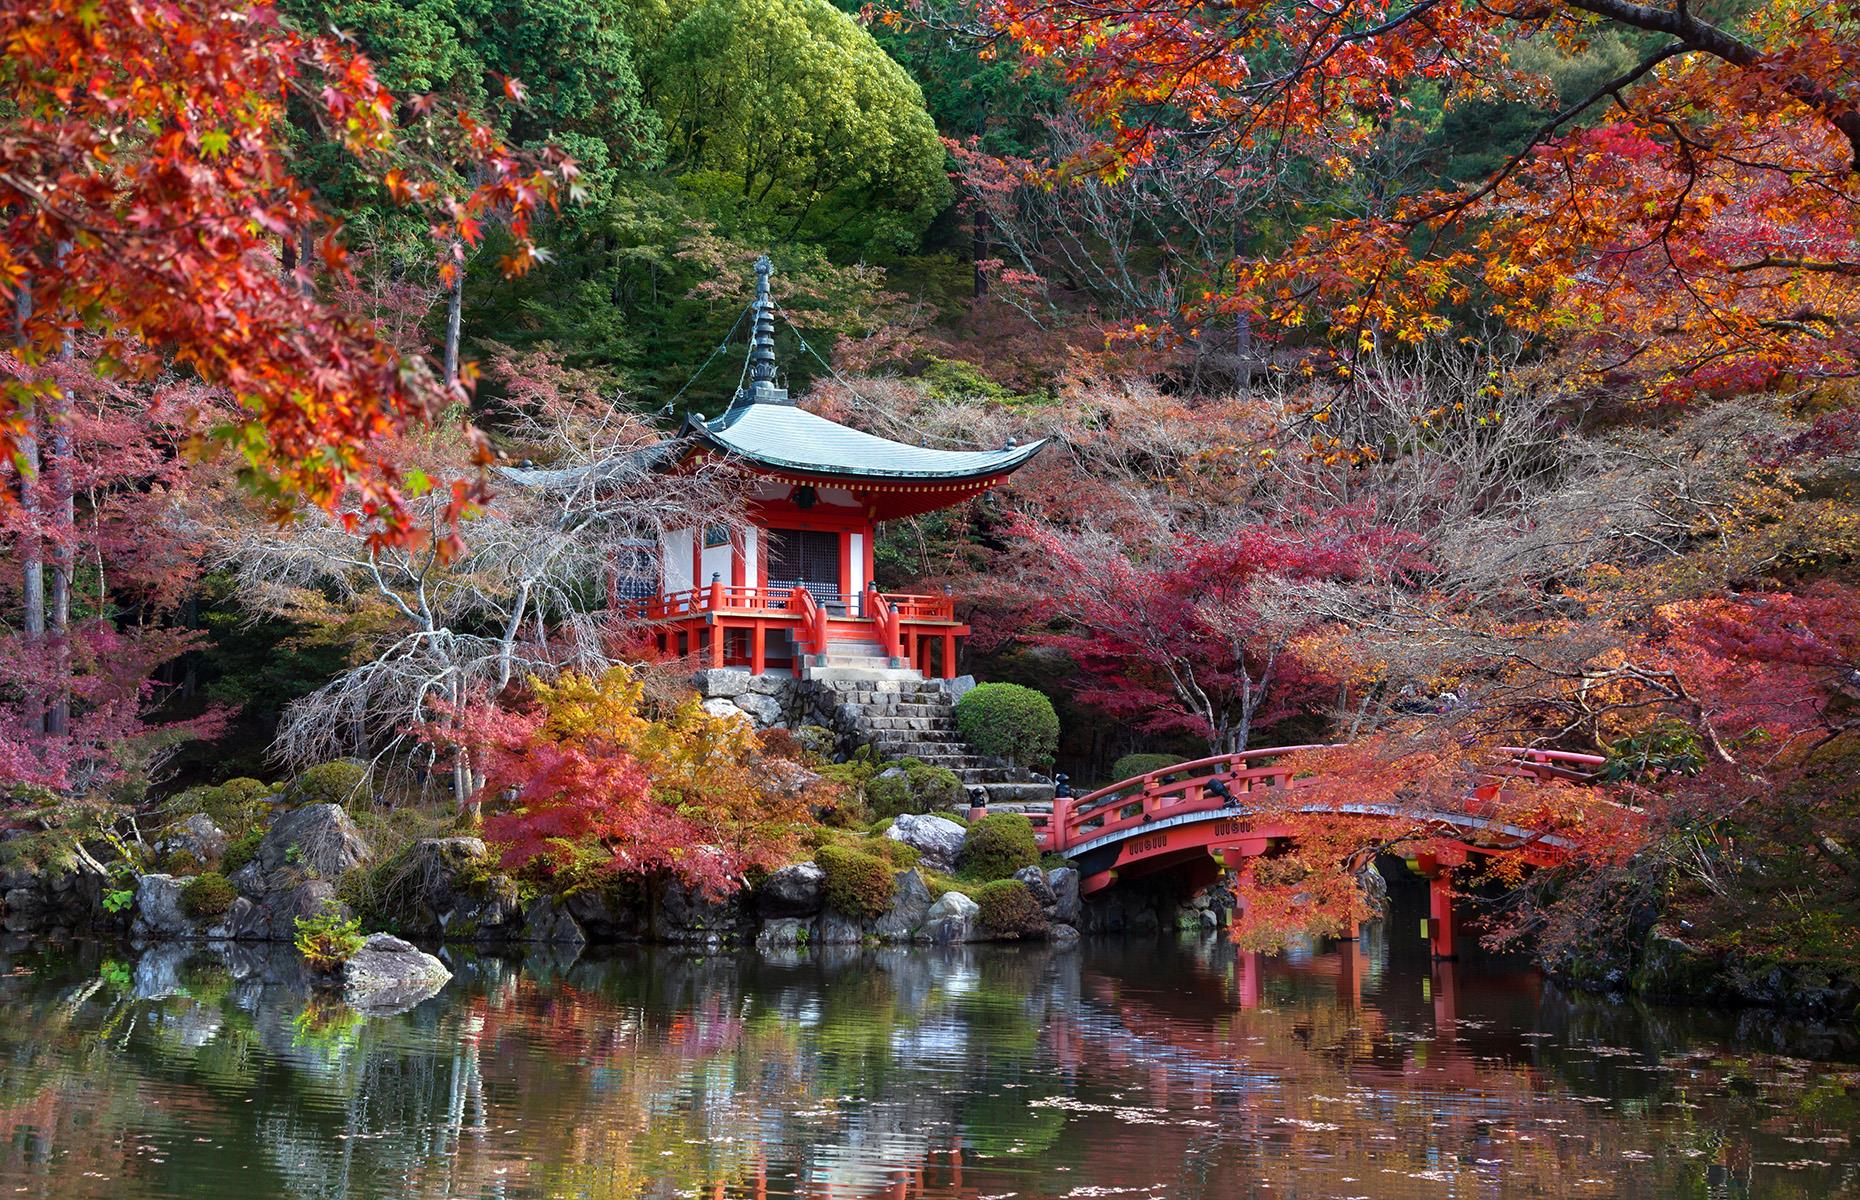 <p>One of the latest countries to join the list of those implementing tourism restrictions, Japan reported that its visitor numbers for September 2023 had reached 96% of their pre-pandemic 2019 numbers, with the result that the tourism ministry has begun to implement an ‘over-tourism prevention plan.’ The plan includes offering 11 ‘model tourist destinations,’ which have been selected by experts from a list of 62 options as alternatives to Japan’s more crowded metropolitan hotspots.</p>